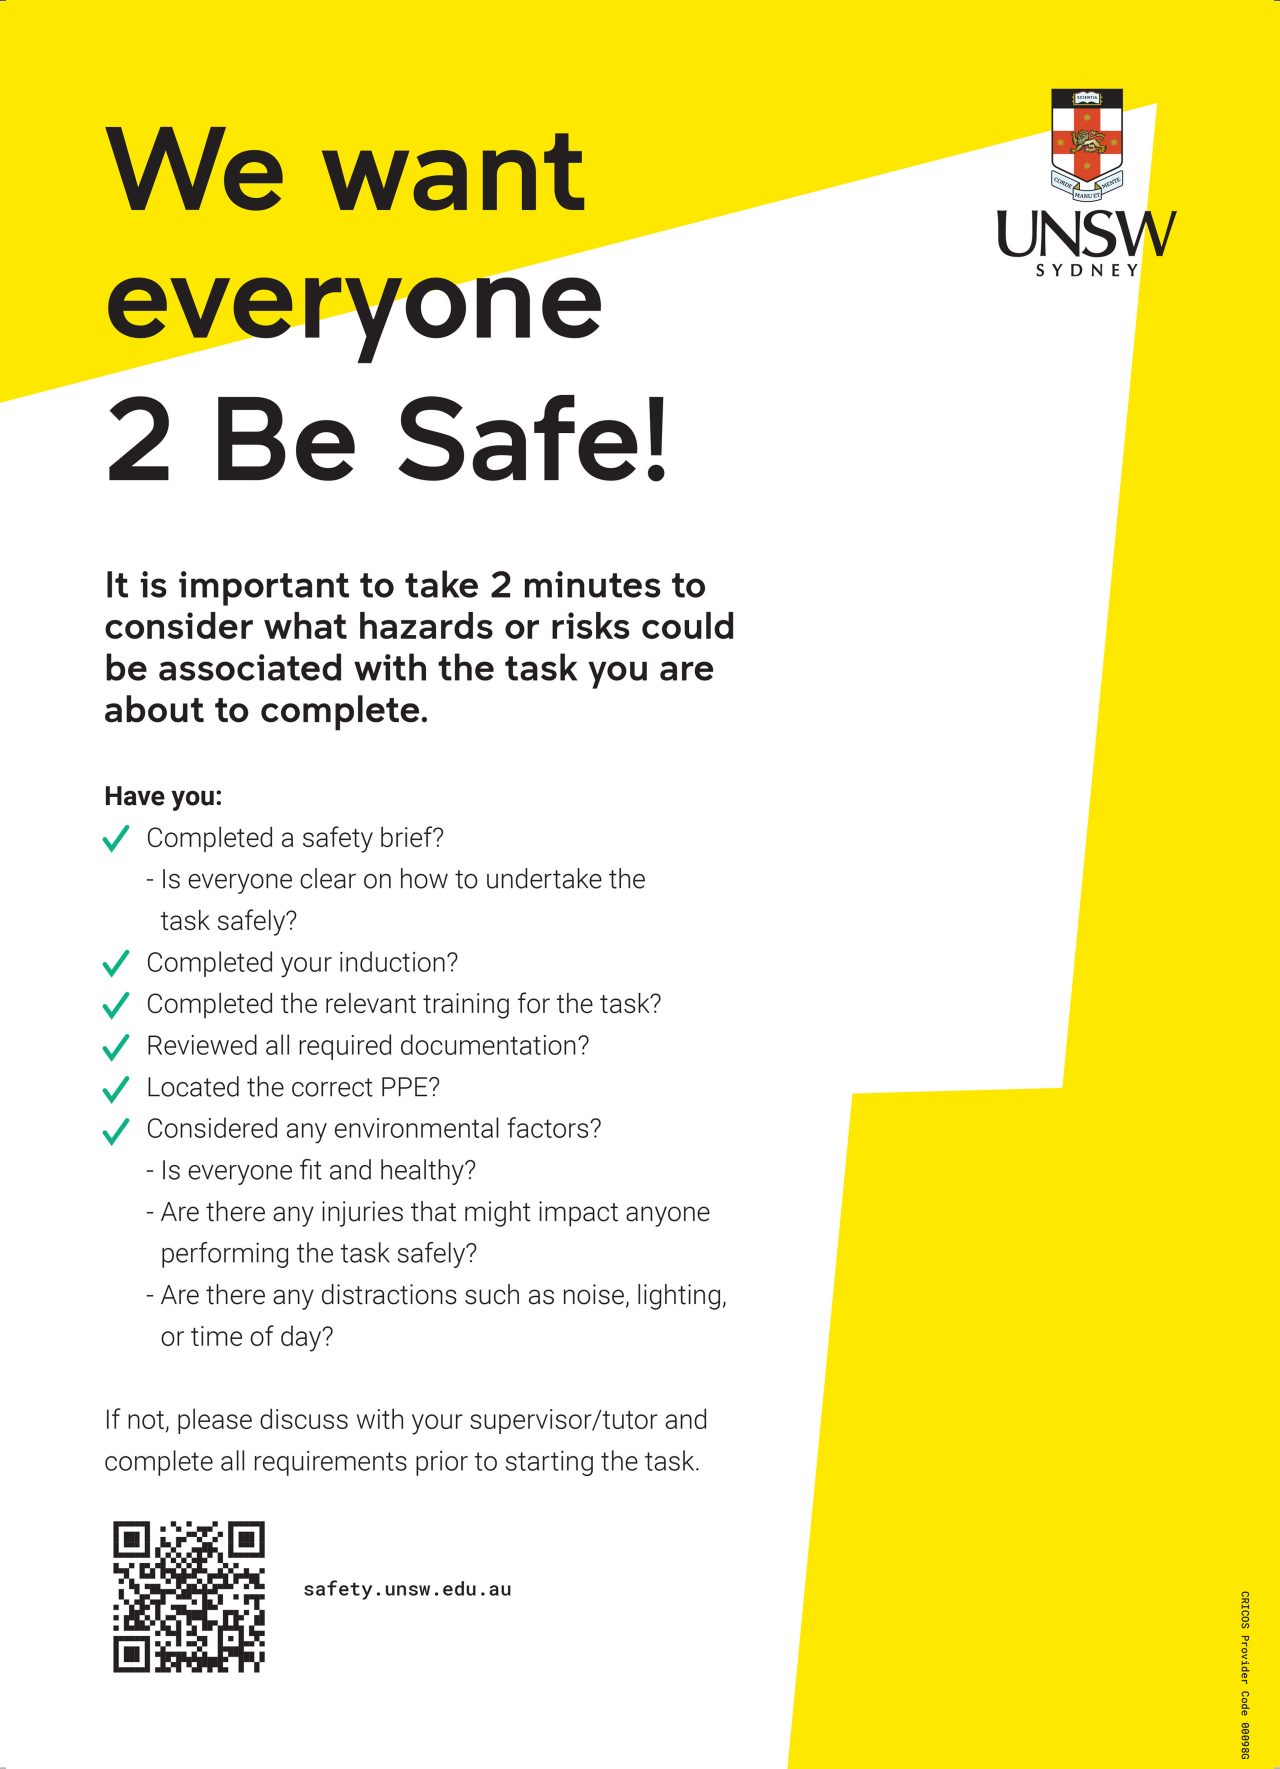 Health and Safety Poster - We want everyone 2 Be Safe!